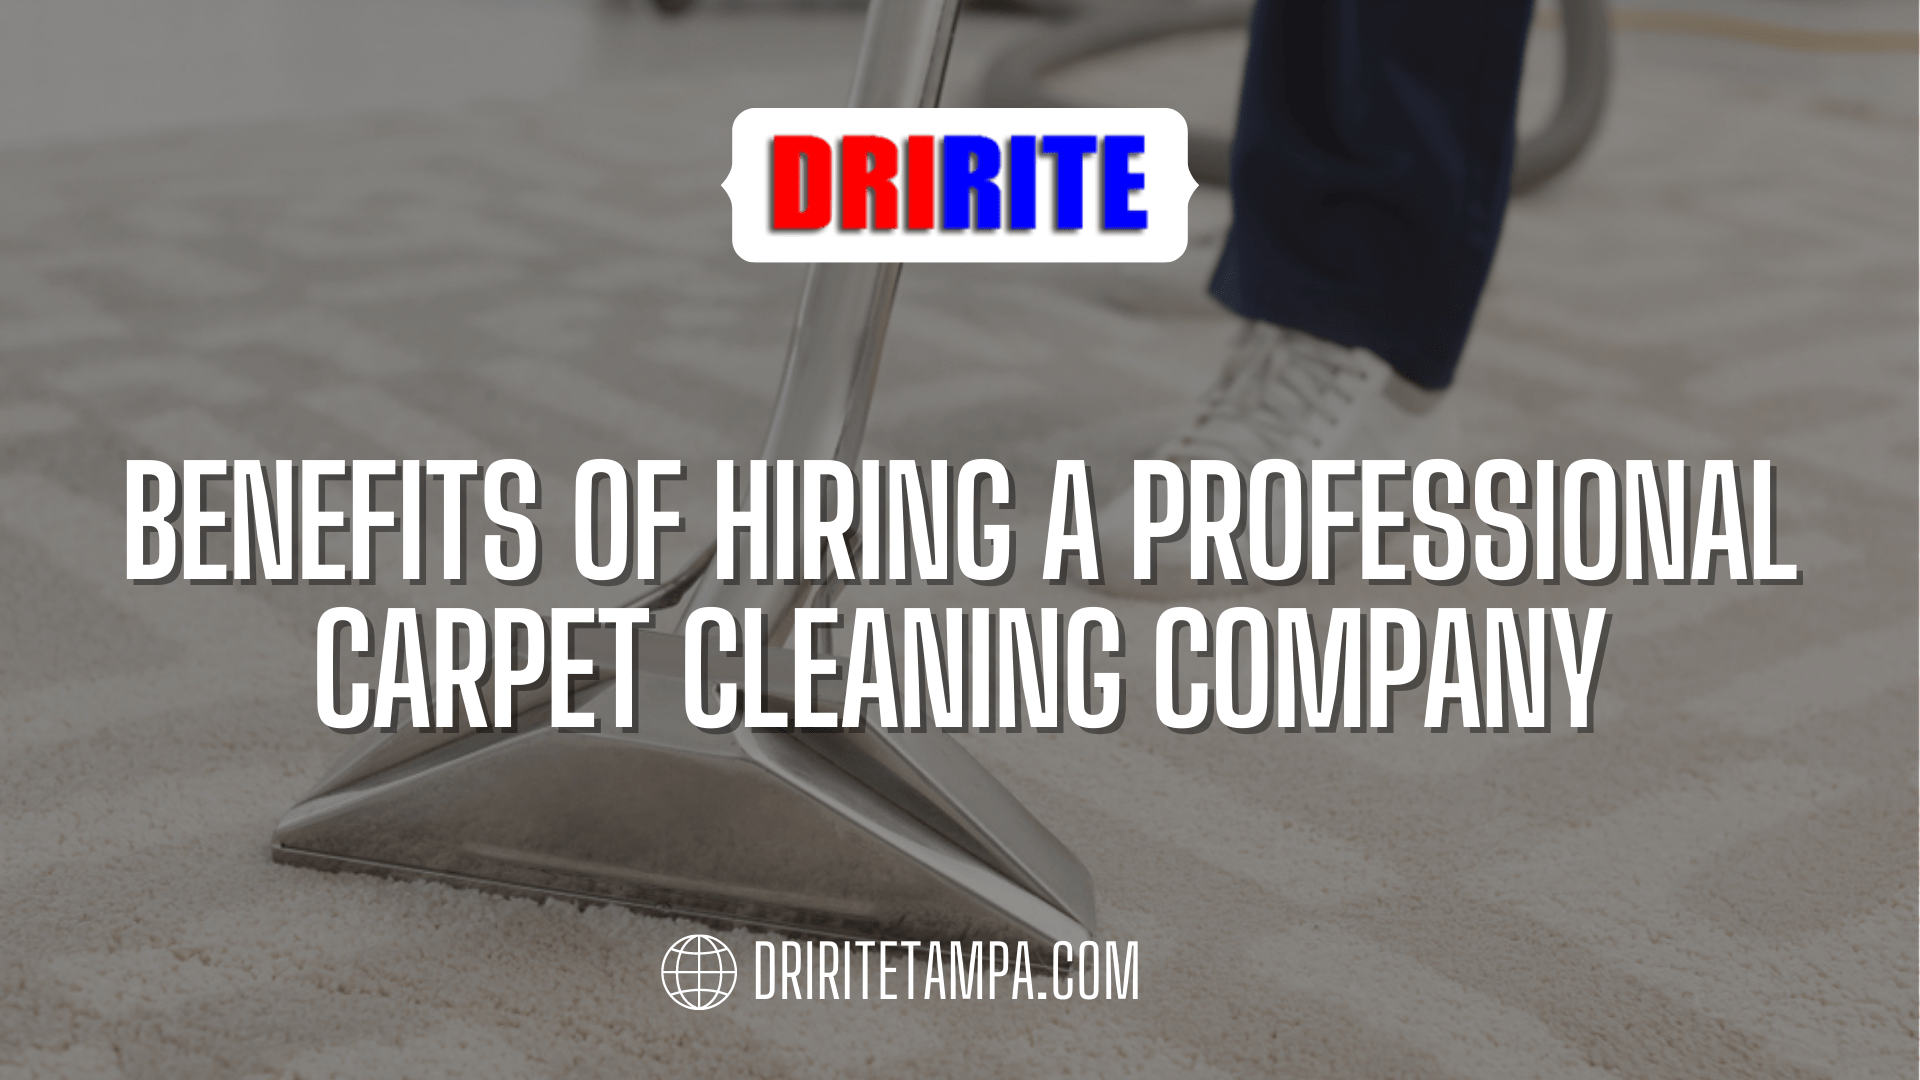 Benefits of Hiring a Professional Carpet Cleaning Company